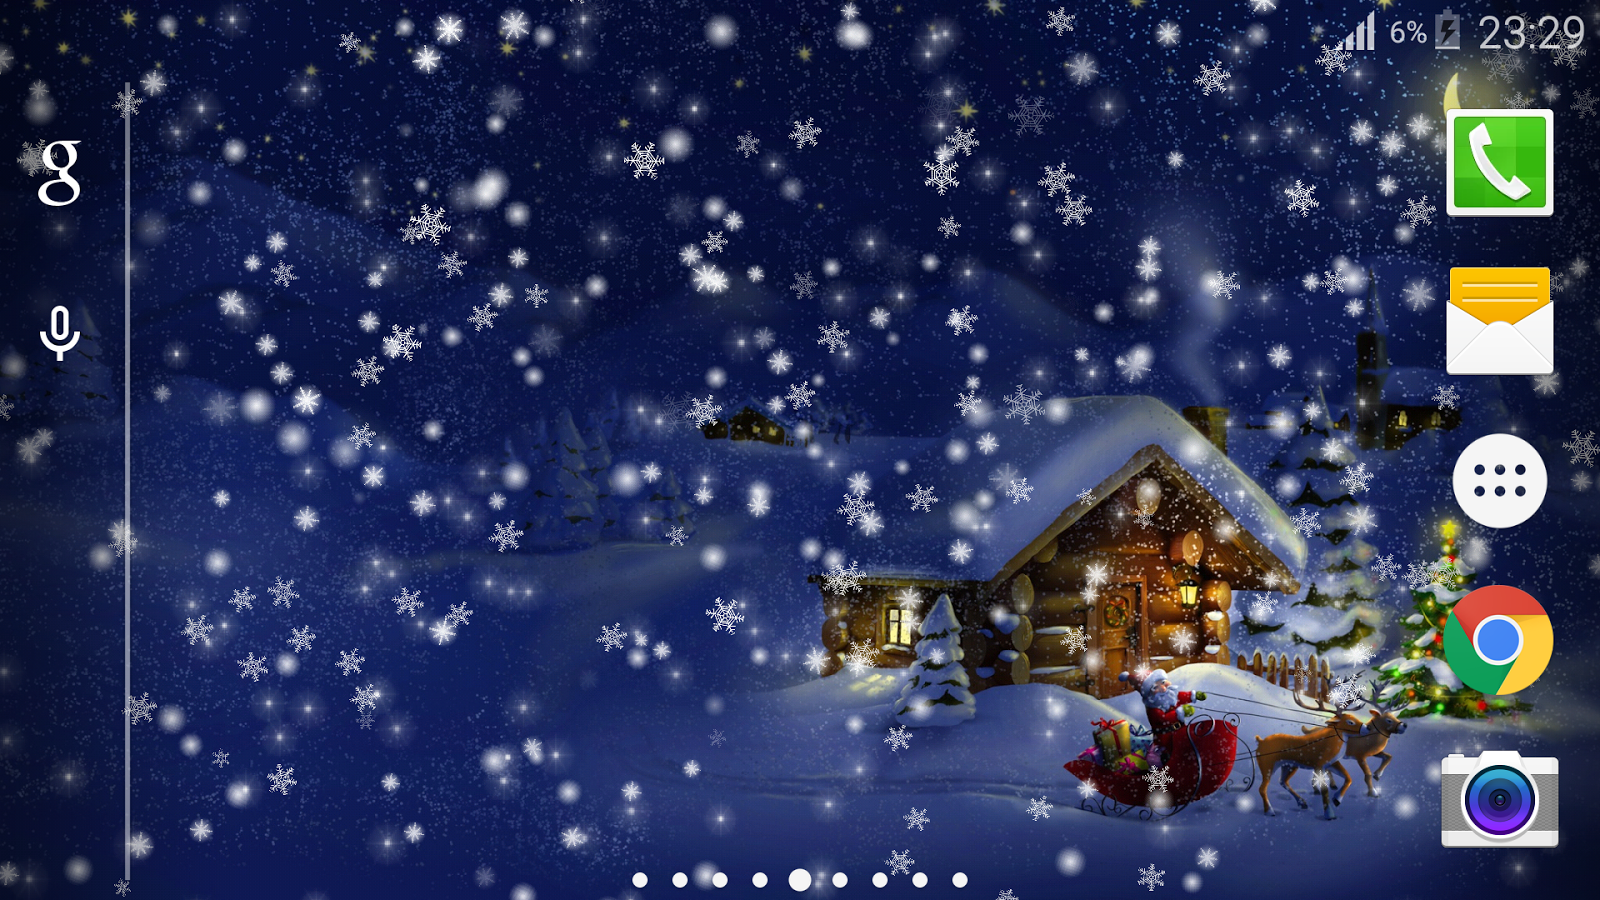 Christmas Night Live Wallpaper - Android Apps on Google Play